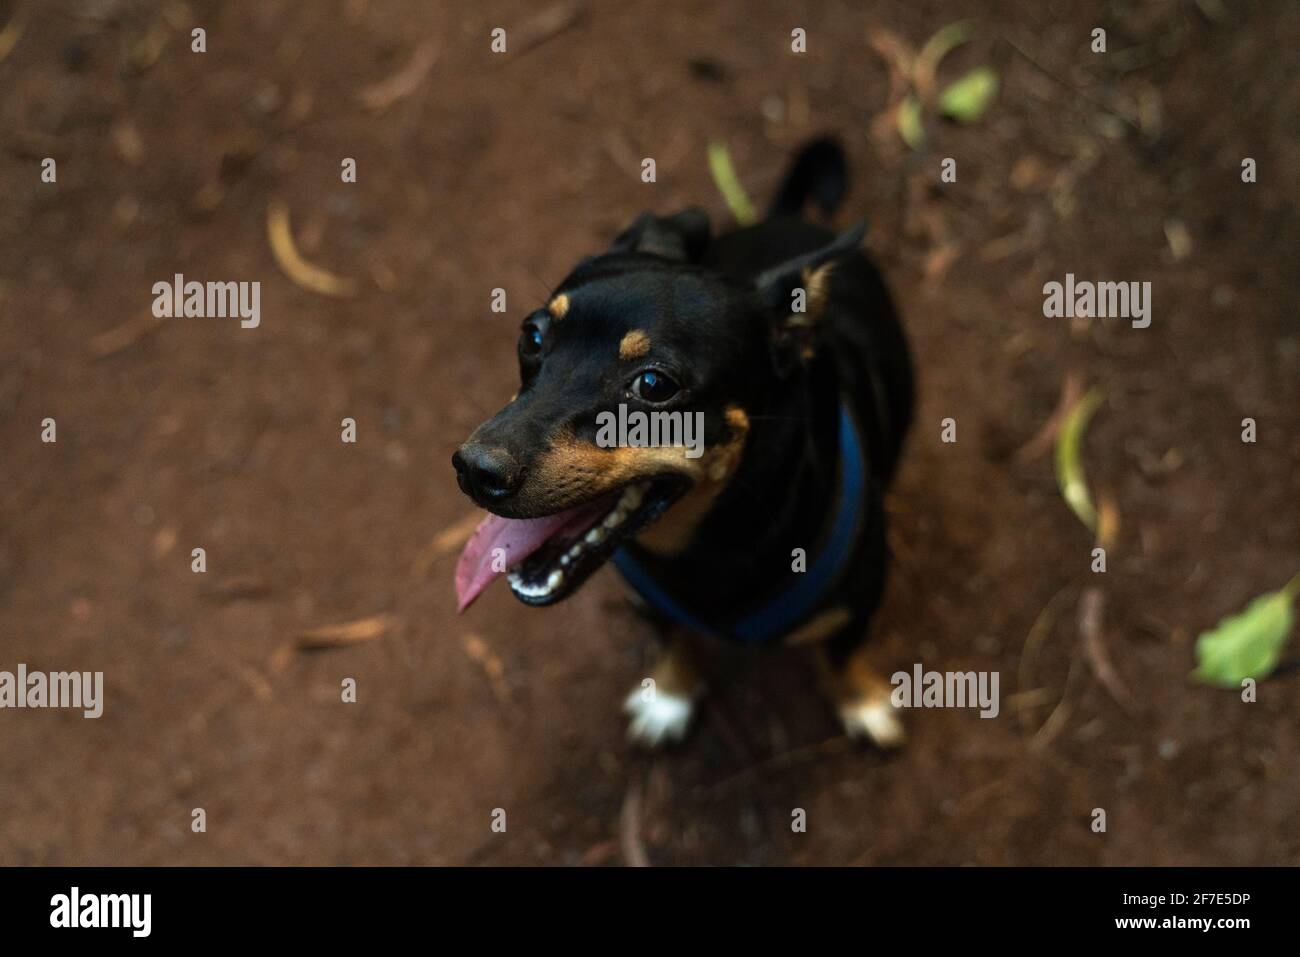 hi-res photography stock Enthused images Alamy and -